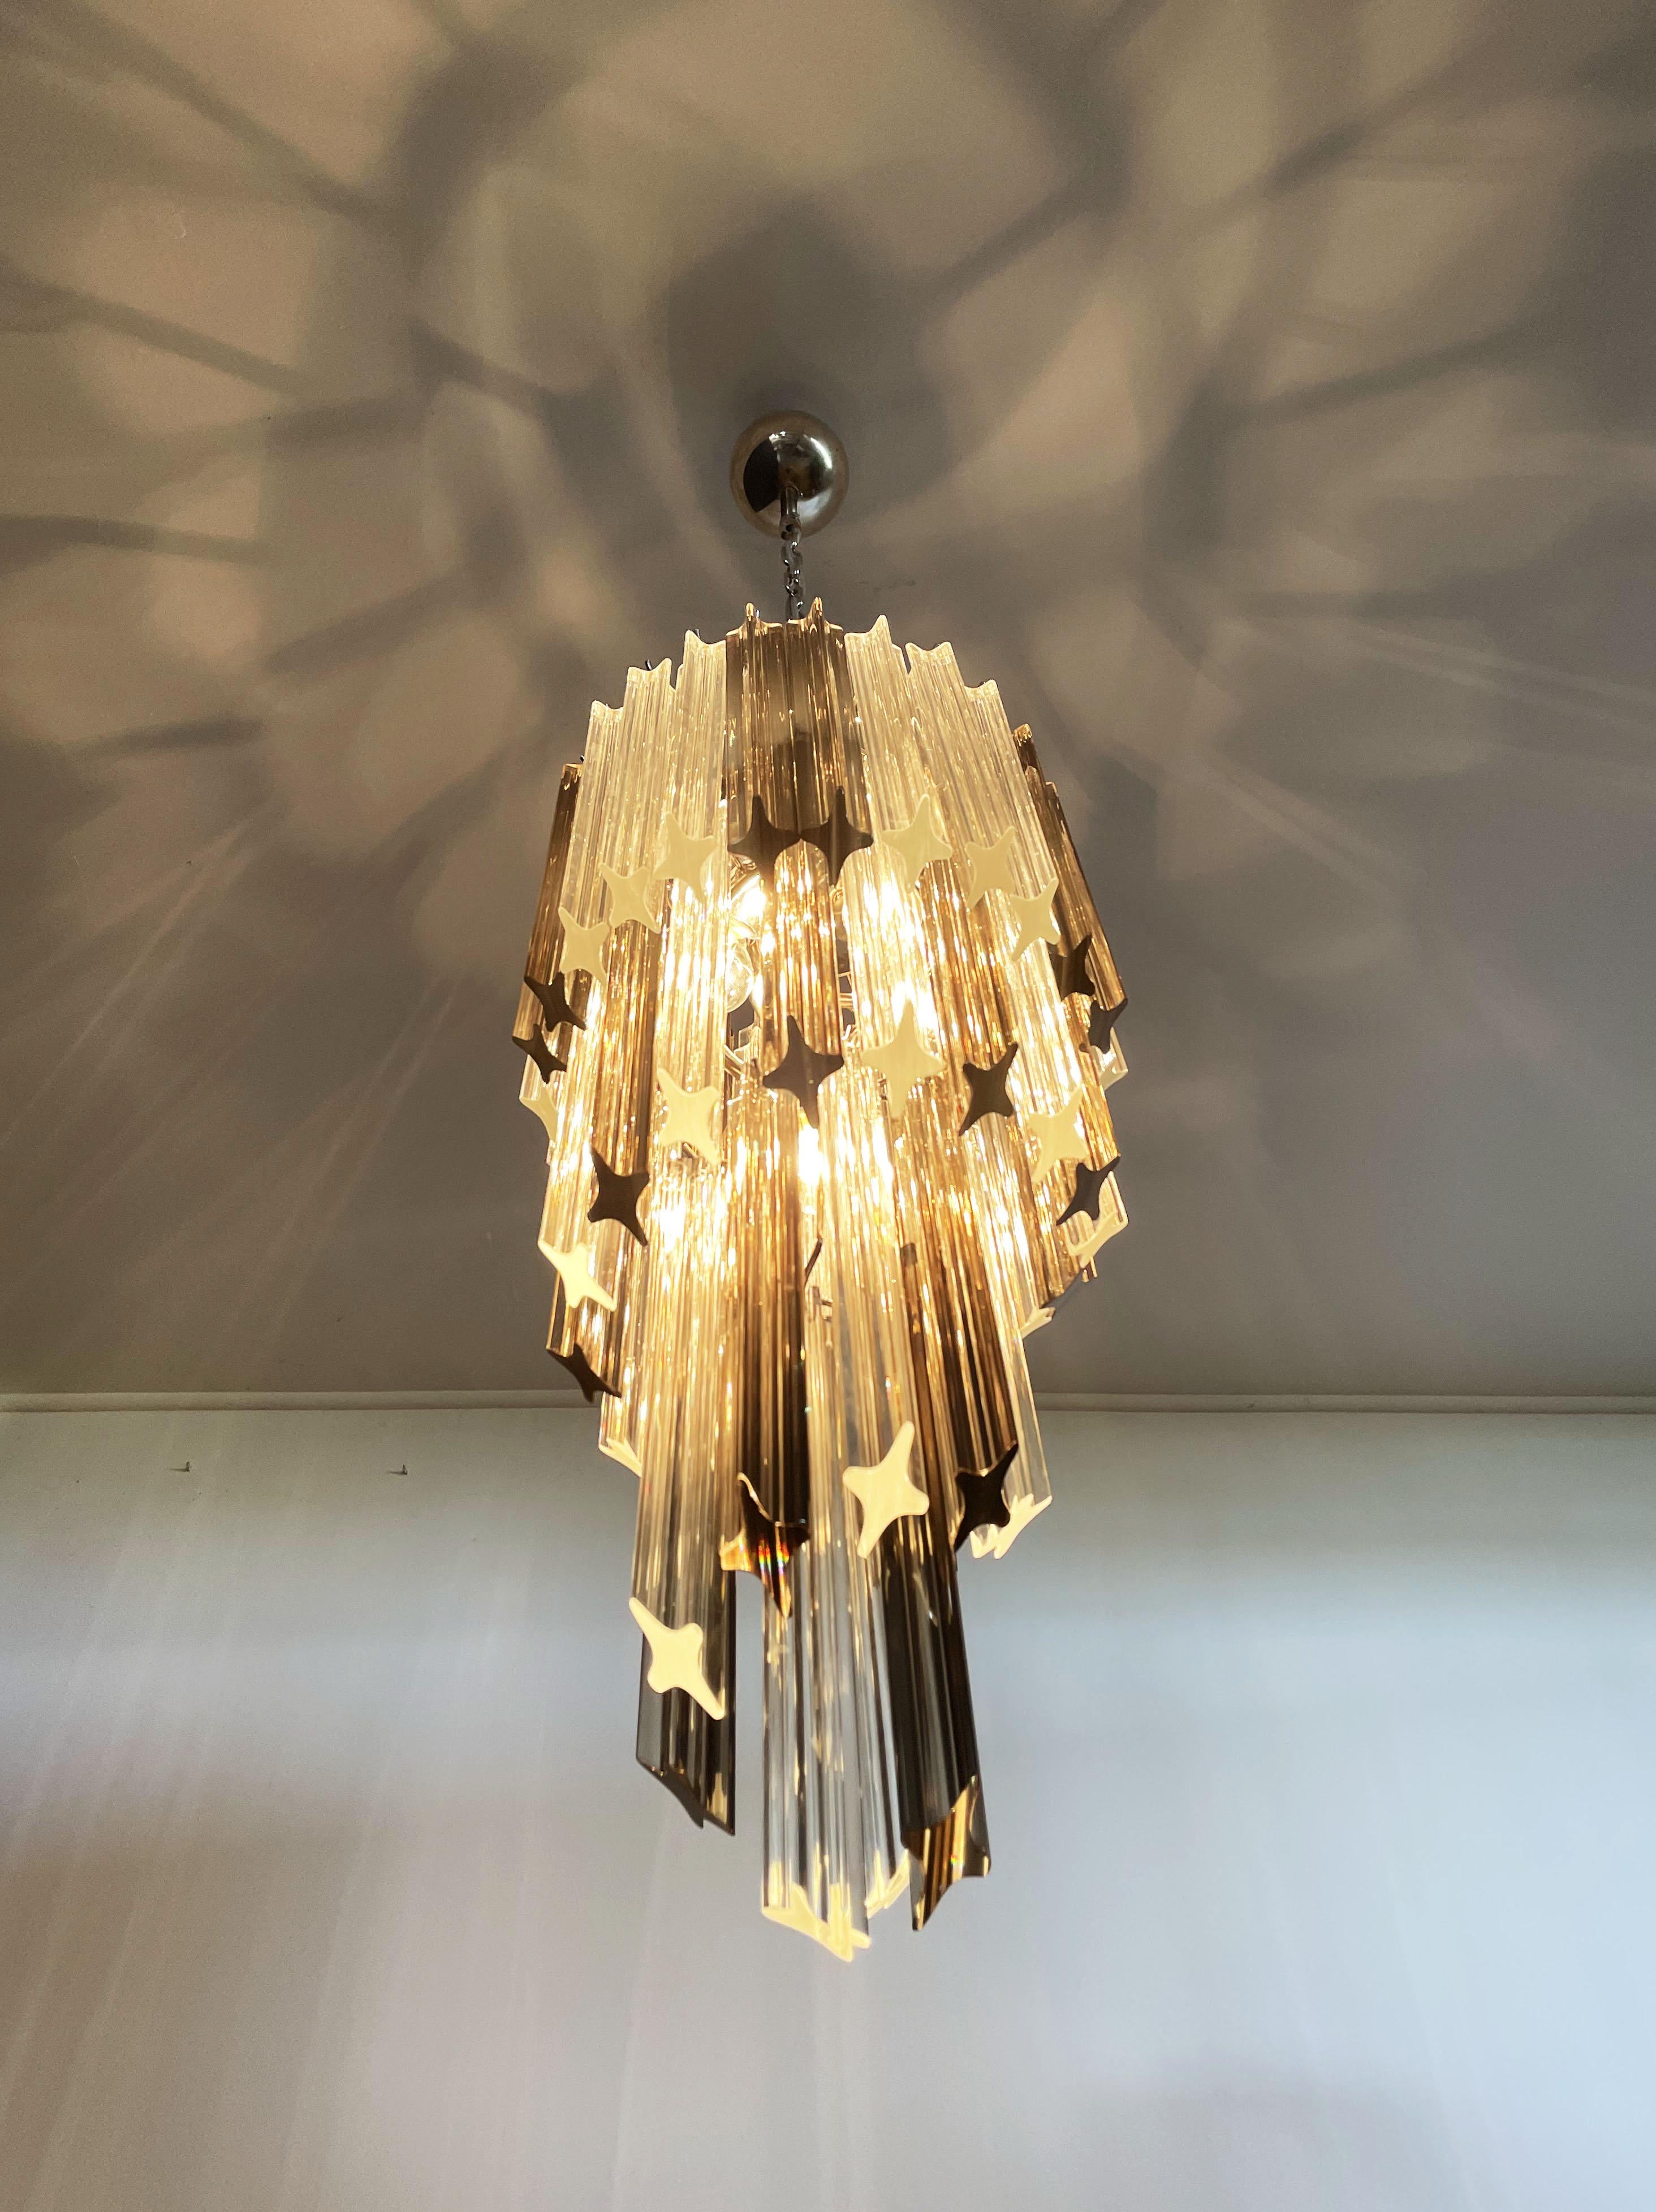 Late 20th Century Murano Big Chandelier, 54 Quadriedri Prisms Trasparent and Smoked For Sale